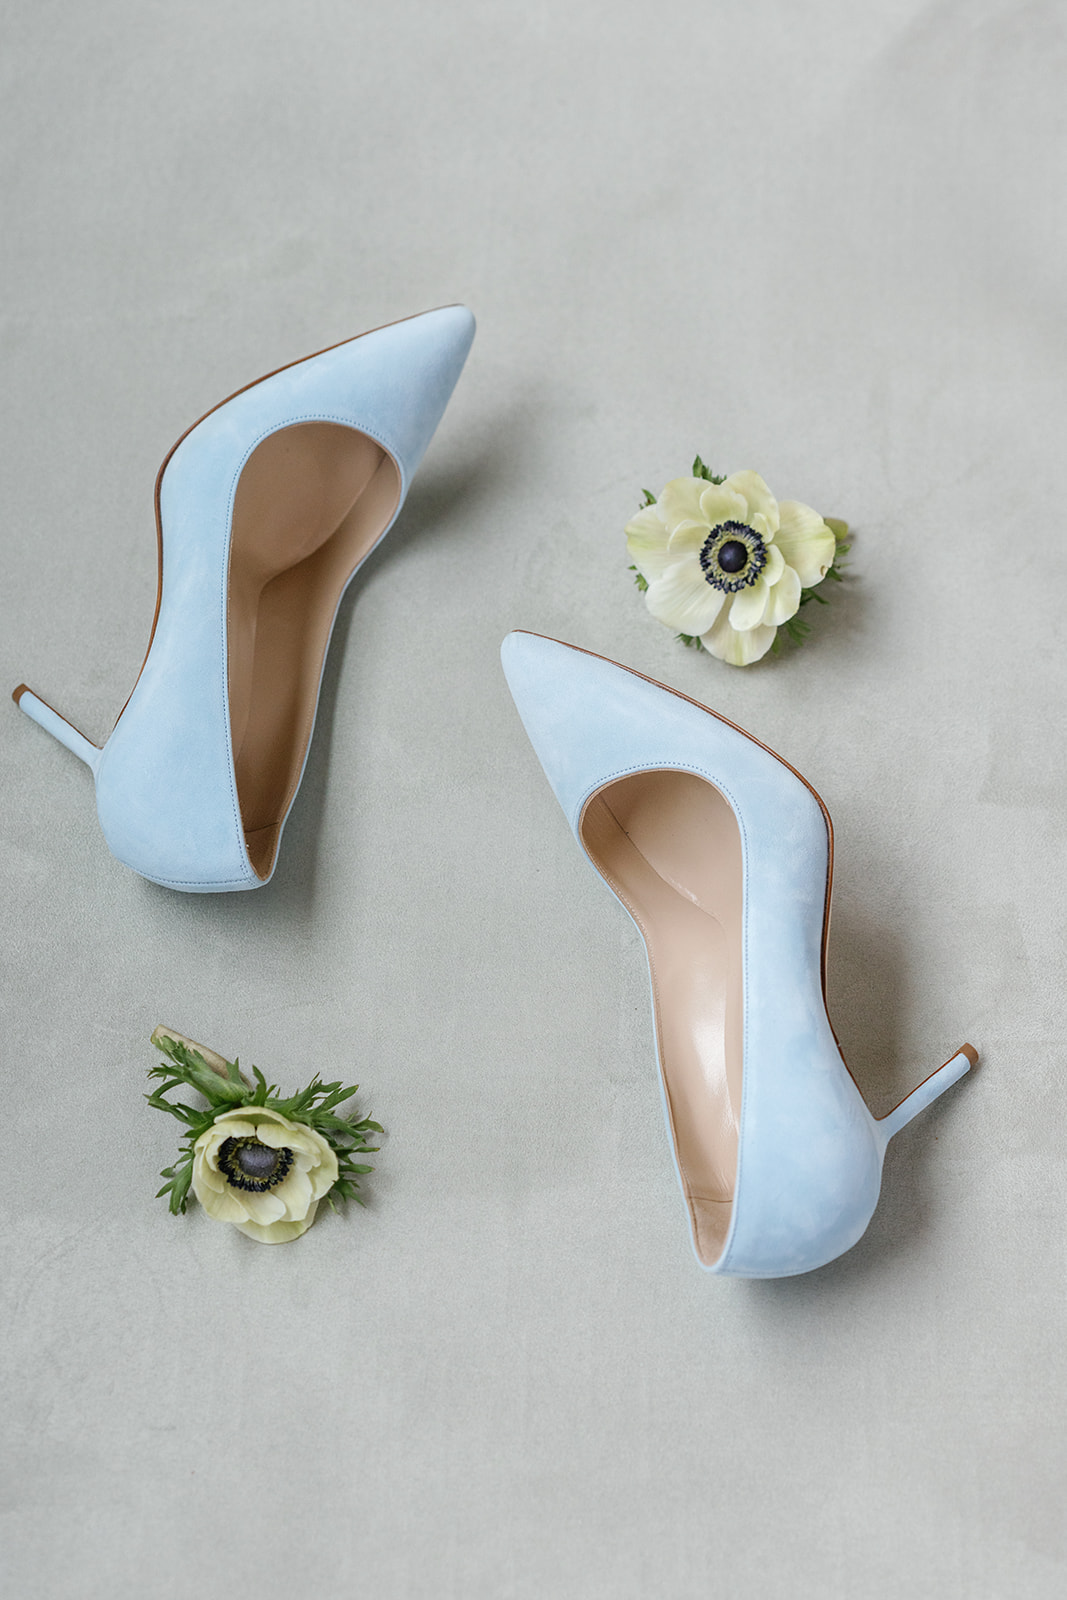 brides baby blue Manolo Blahnik shoes for something blue at wedding 